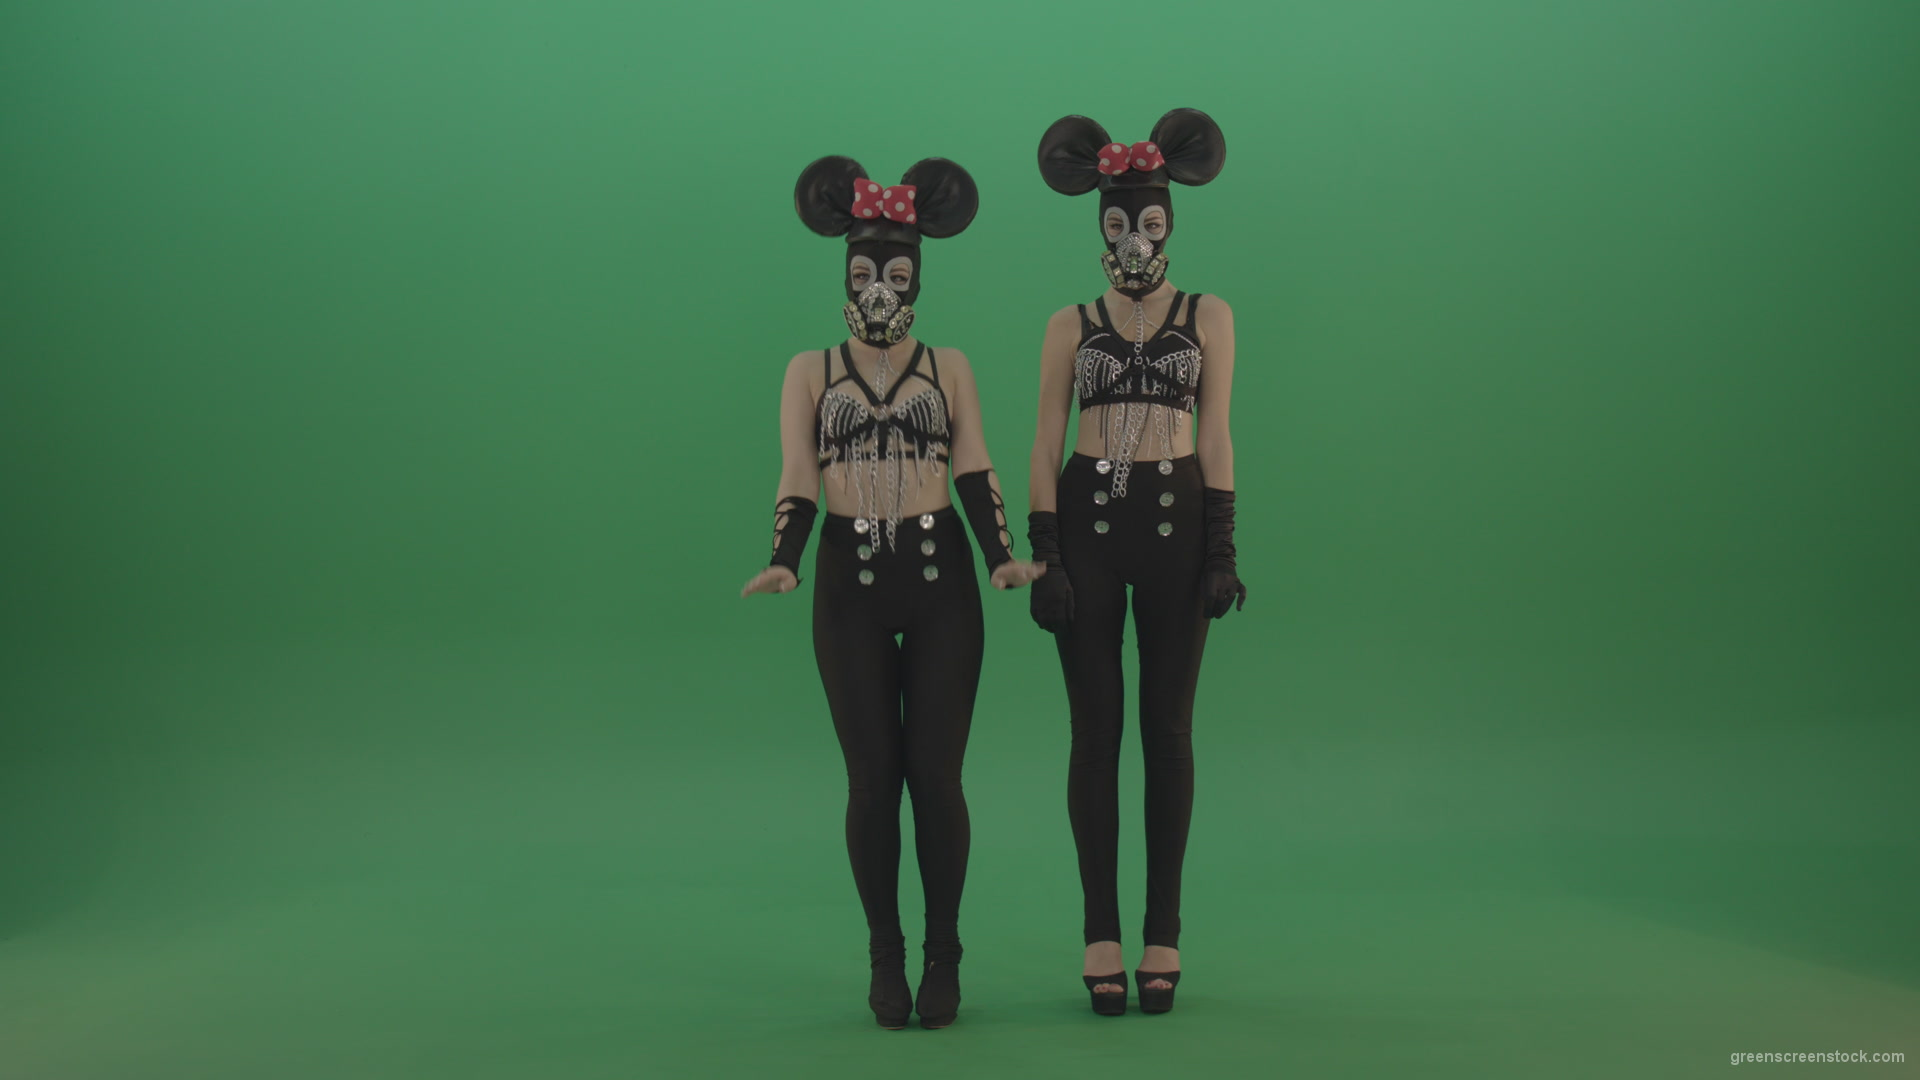 Two-girls-dressed-in-Mickey-Mouse-sit-squarelyon-green-screen_004 Green Screen Stock